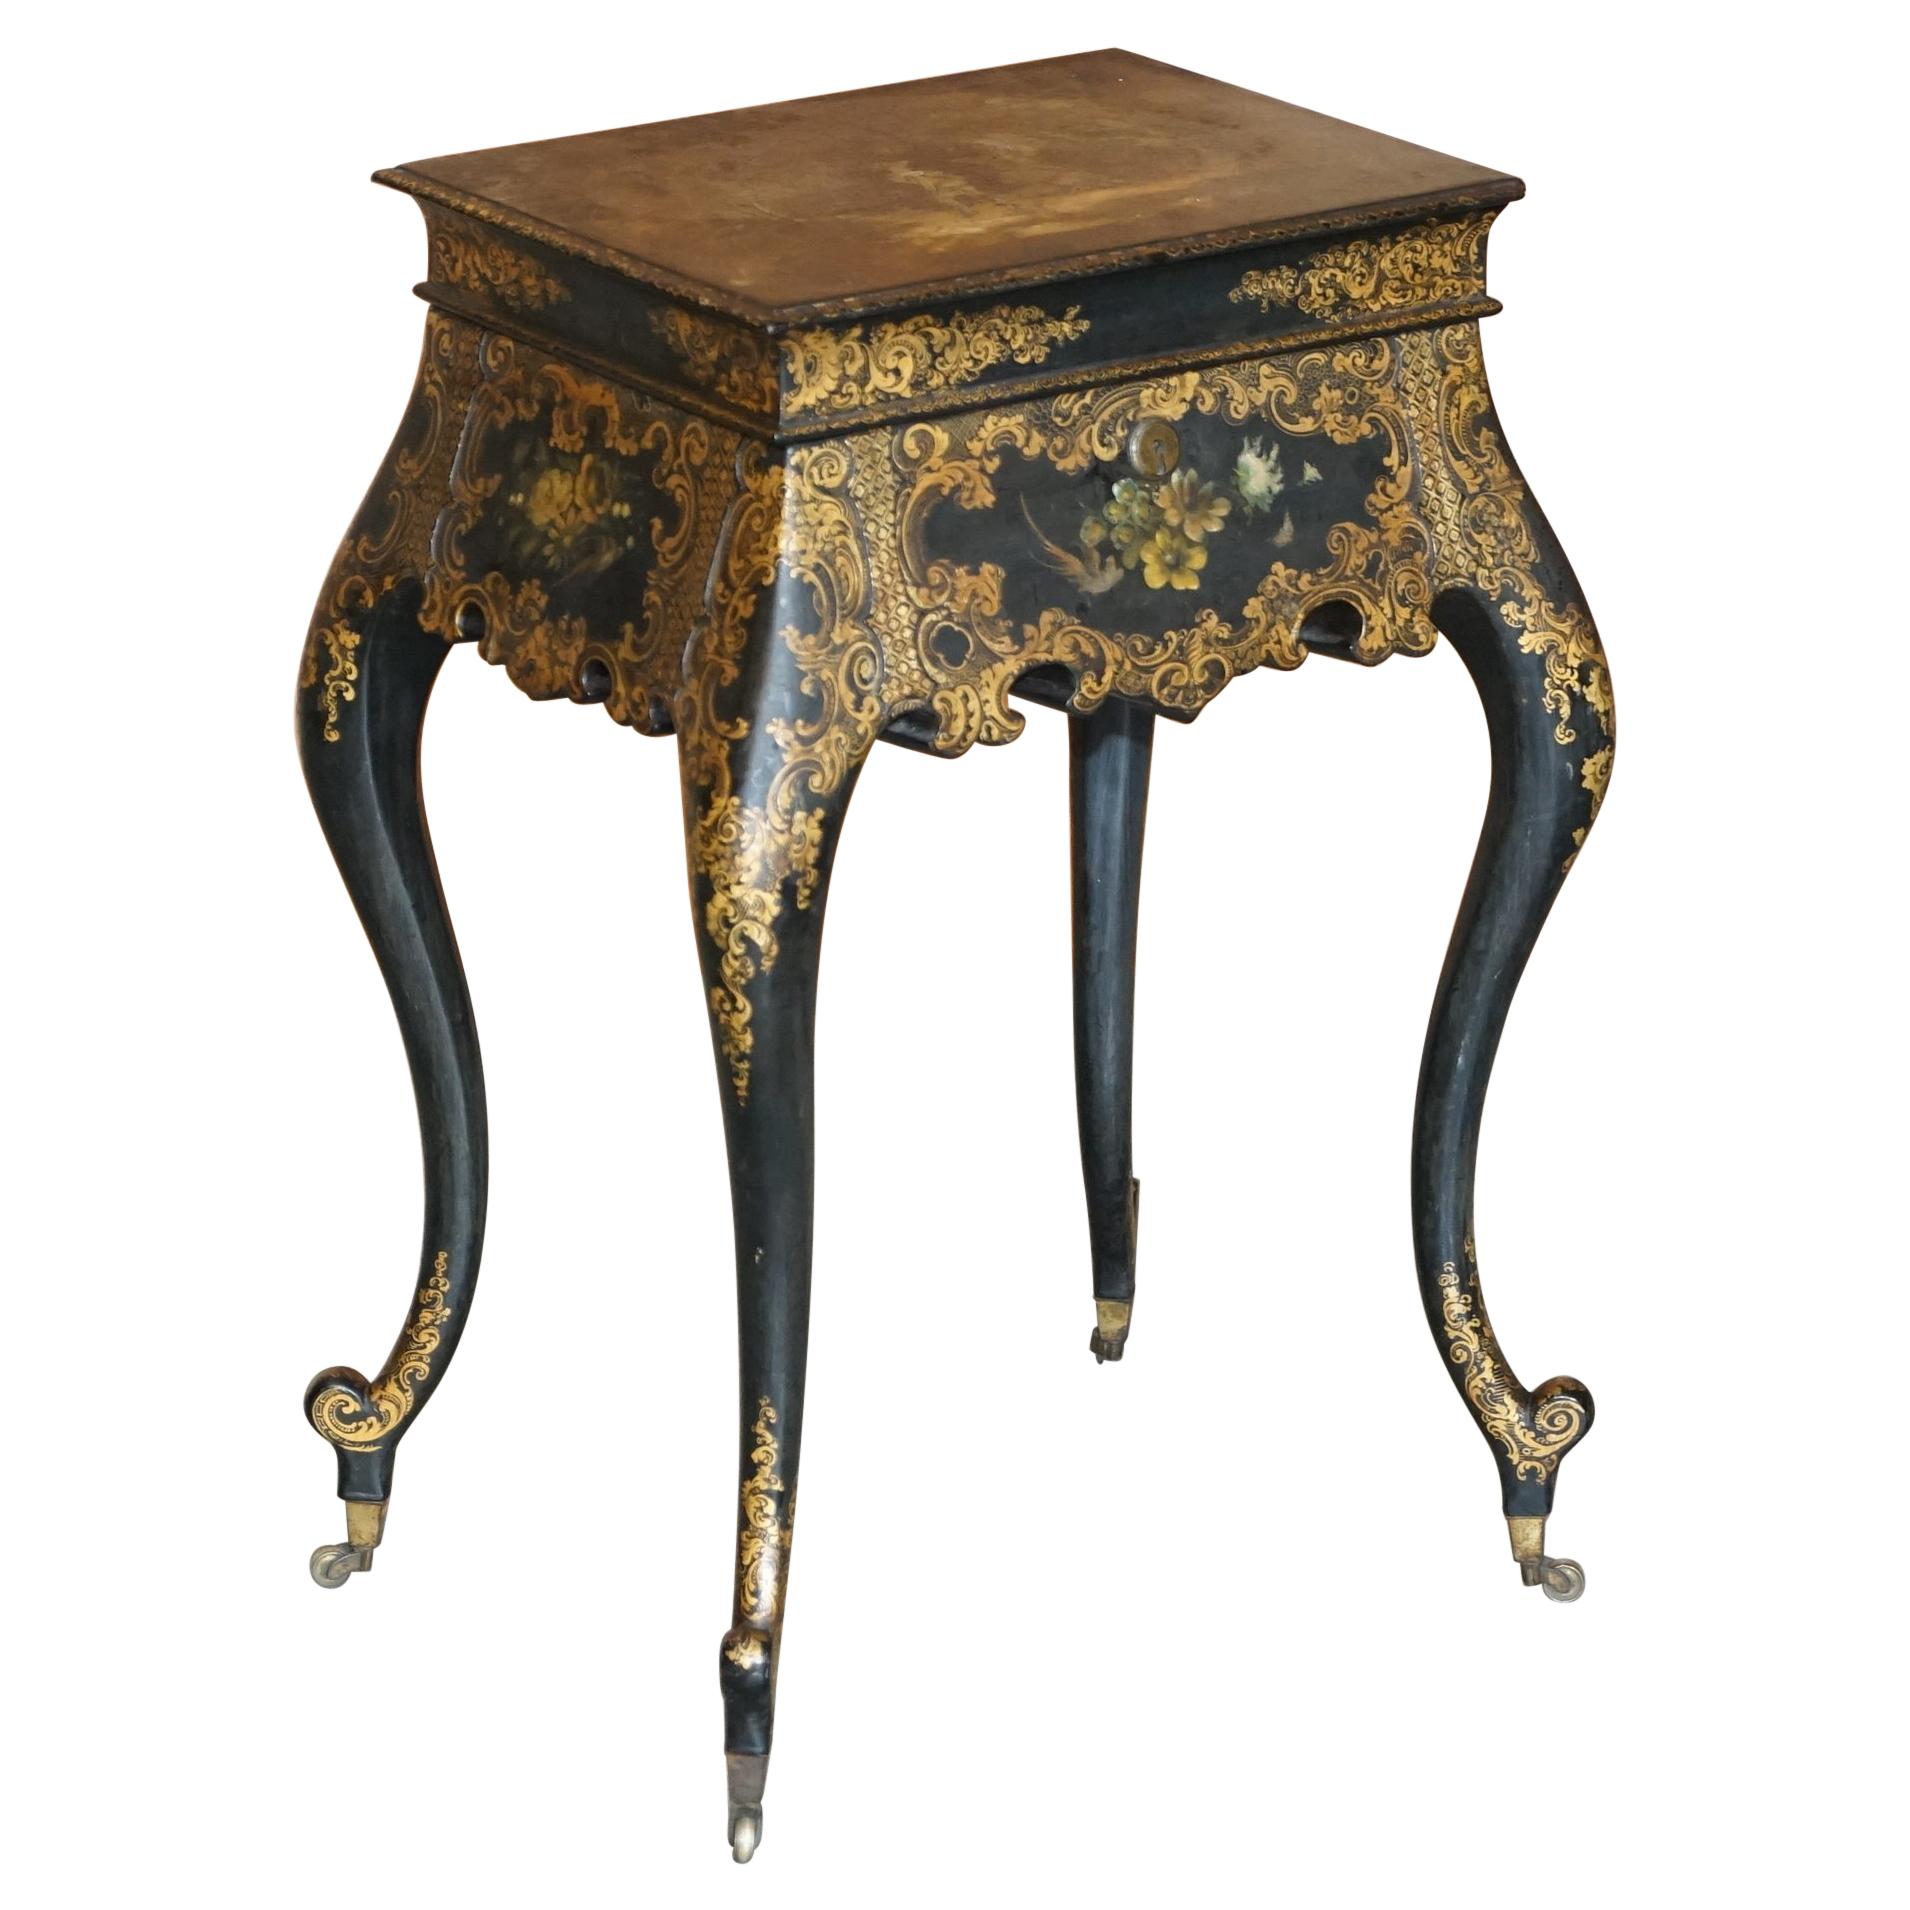 Georgian Antique circa 1800 George III Chinese Lacquer & Gold Gilt Work Table For Sale